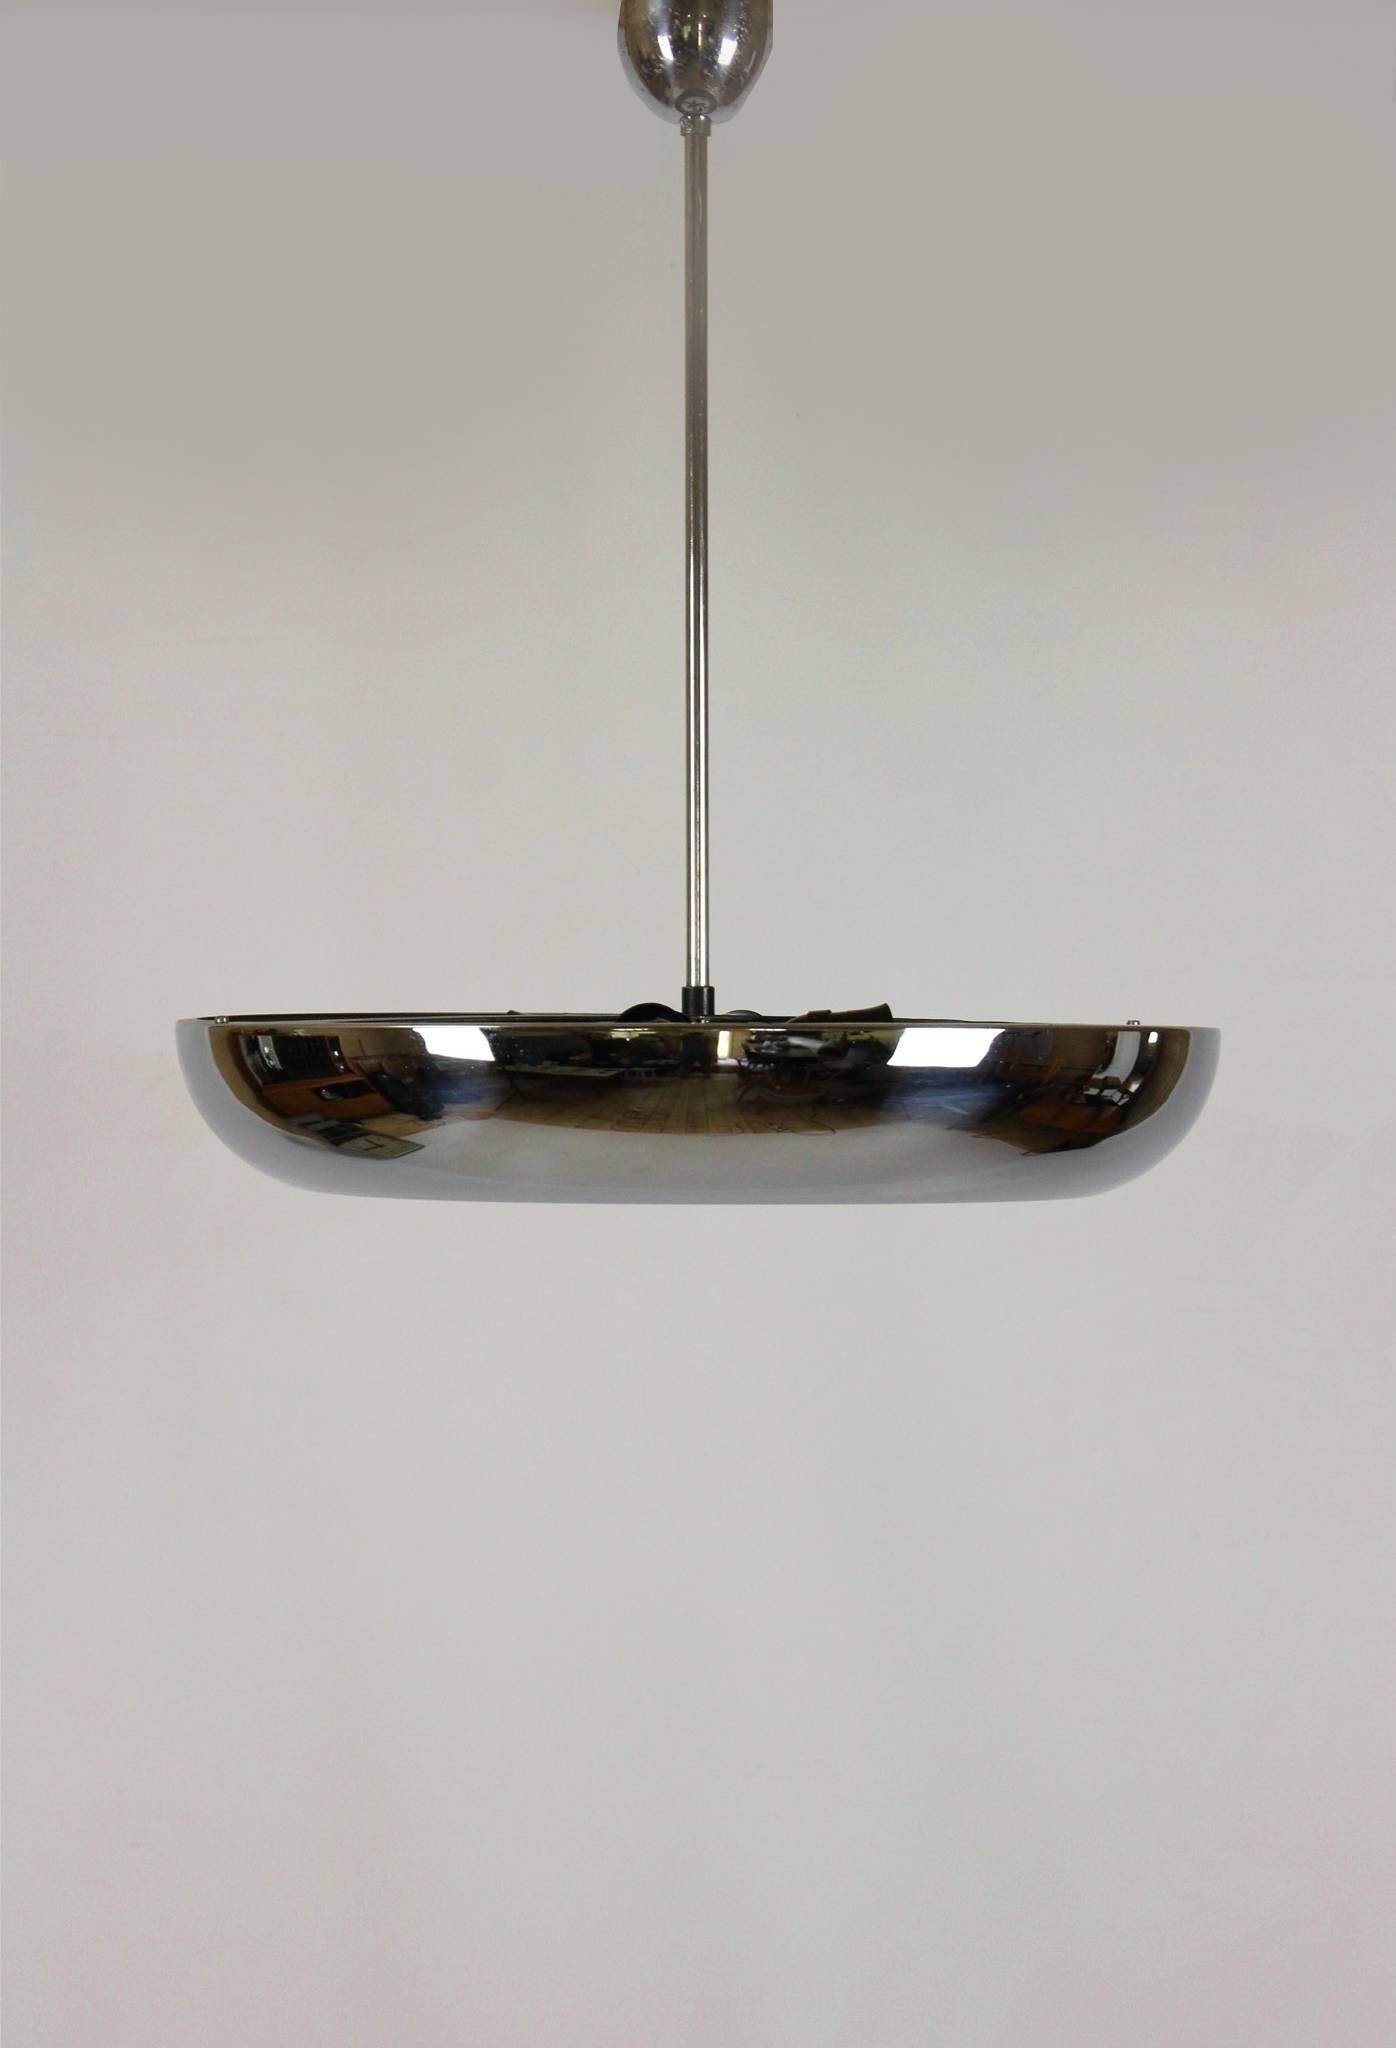 Bauhaus UFO pendant lamp designed by Josef Hurka for Napako and produced in the 1930s.
Made of chromed metal and glass, features four bakelite lampholders which hold E27 bulbs.
In a original vintage condition.